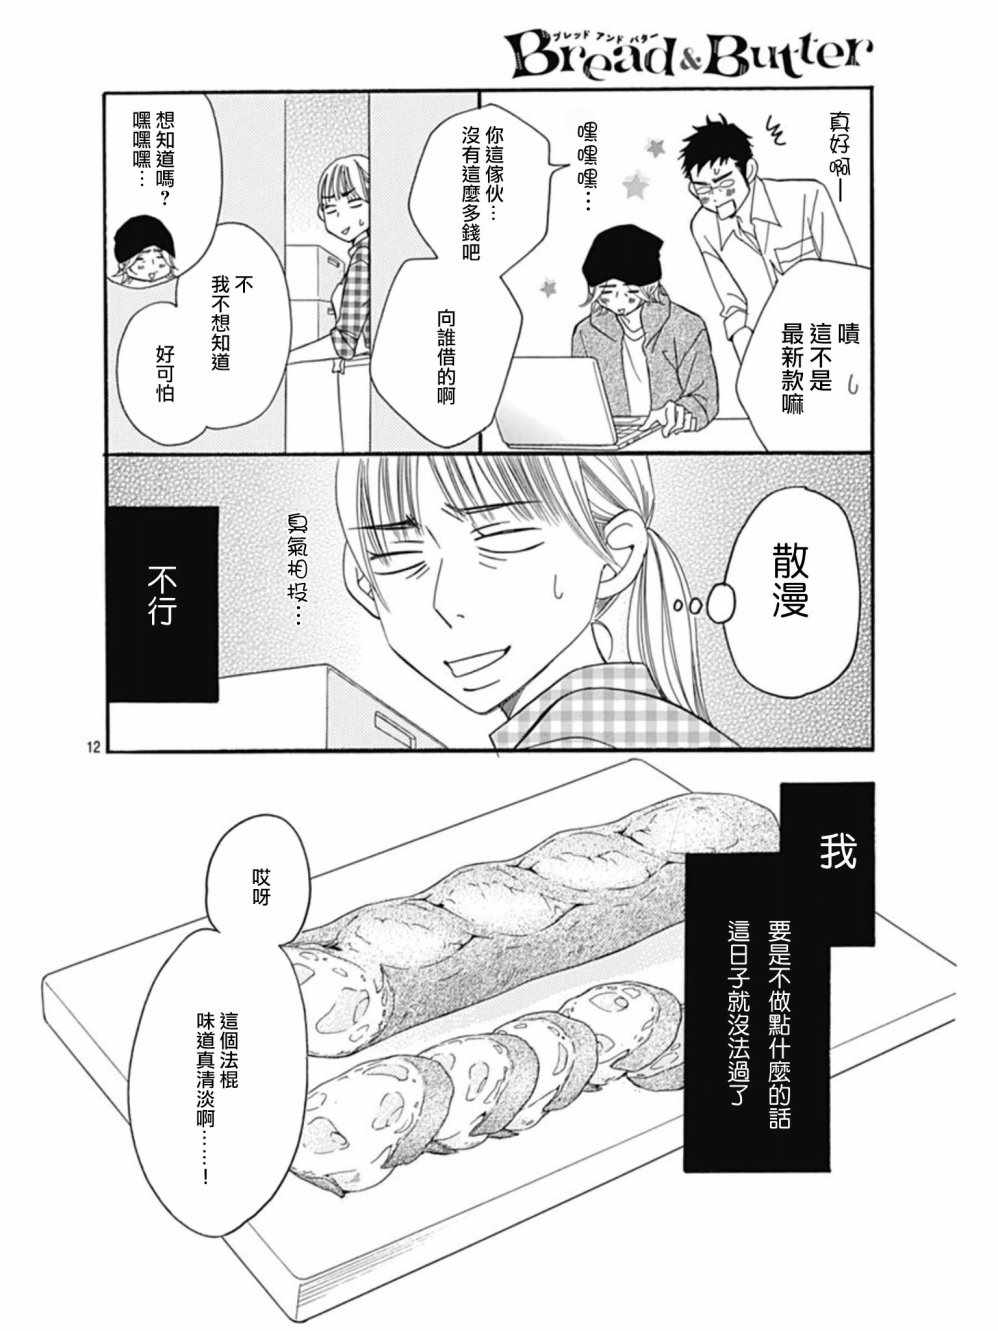 Bread&Butter - 第25話 - 5